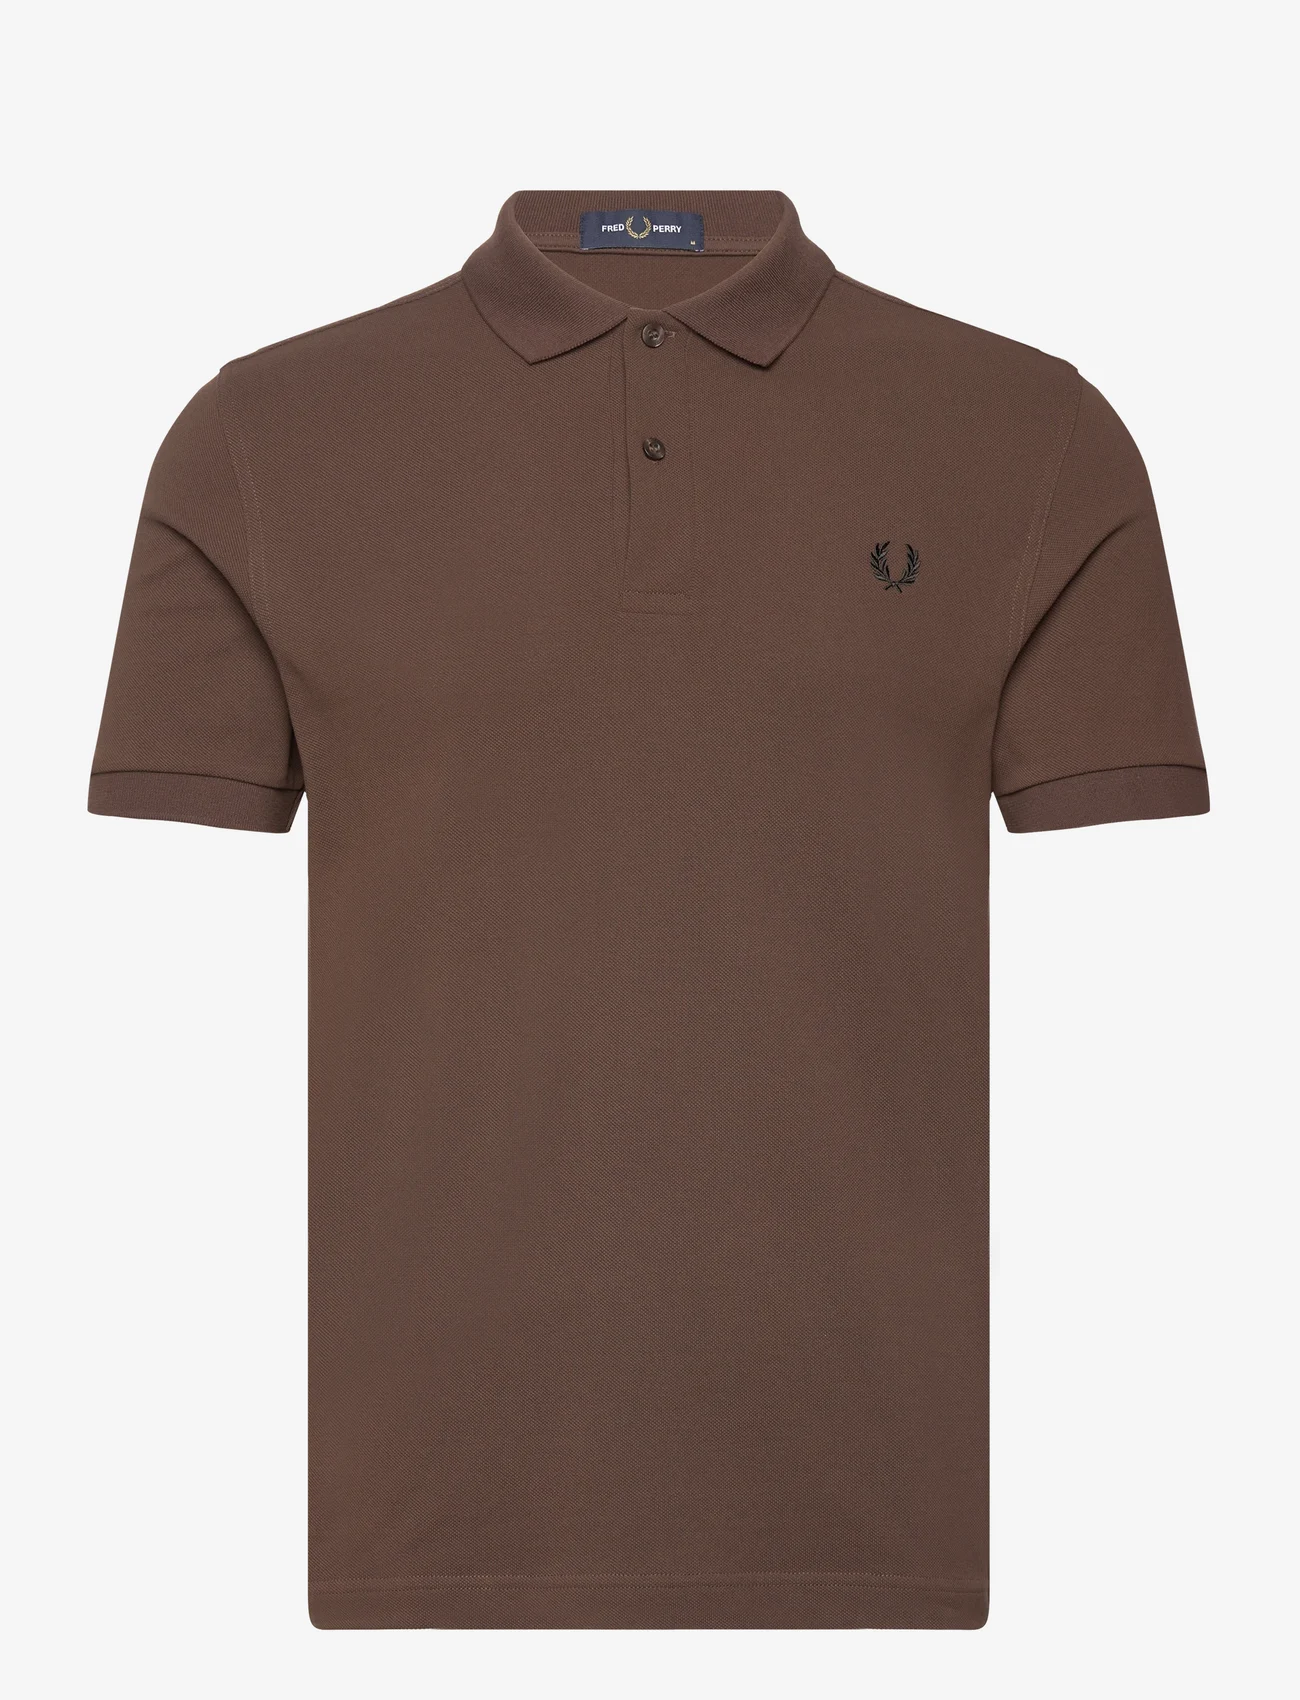 Fred Perry - THE FRED PERRY SHIRT - kortermede - burnt tobacco - 0